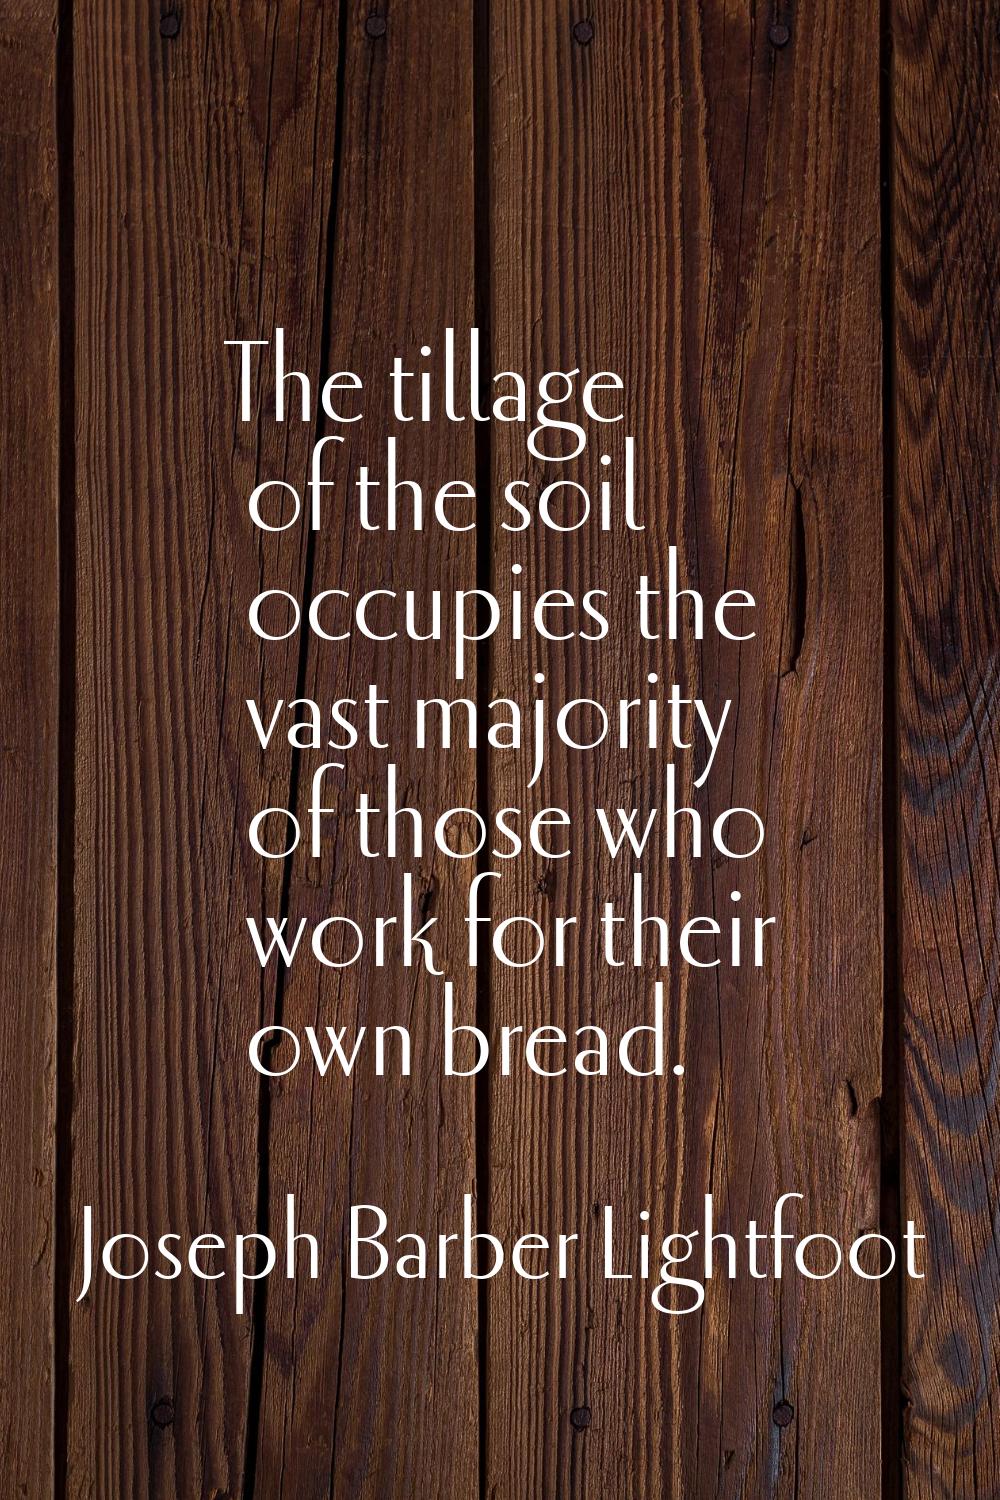 The tillage of the soil occupies the vast majority of those who work for their own bread.